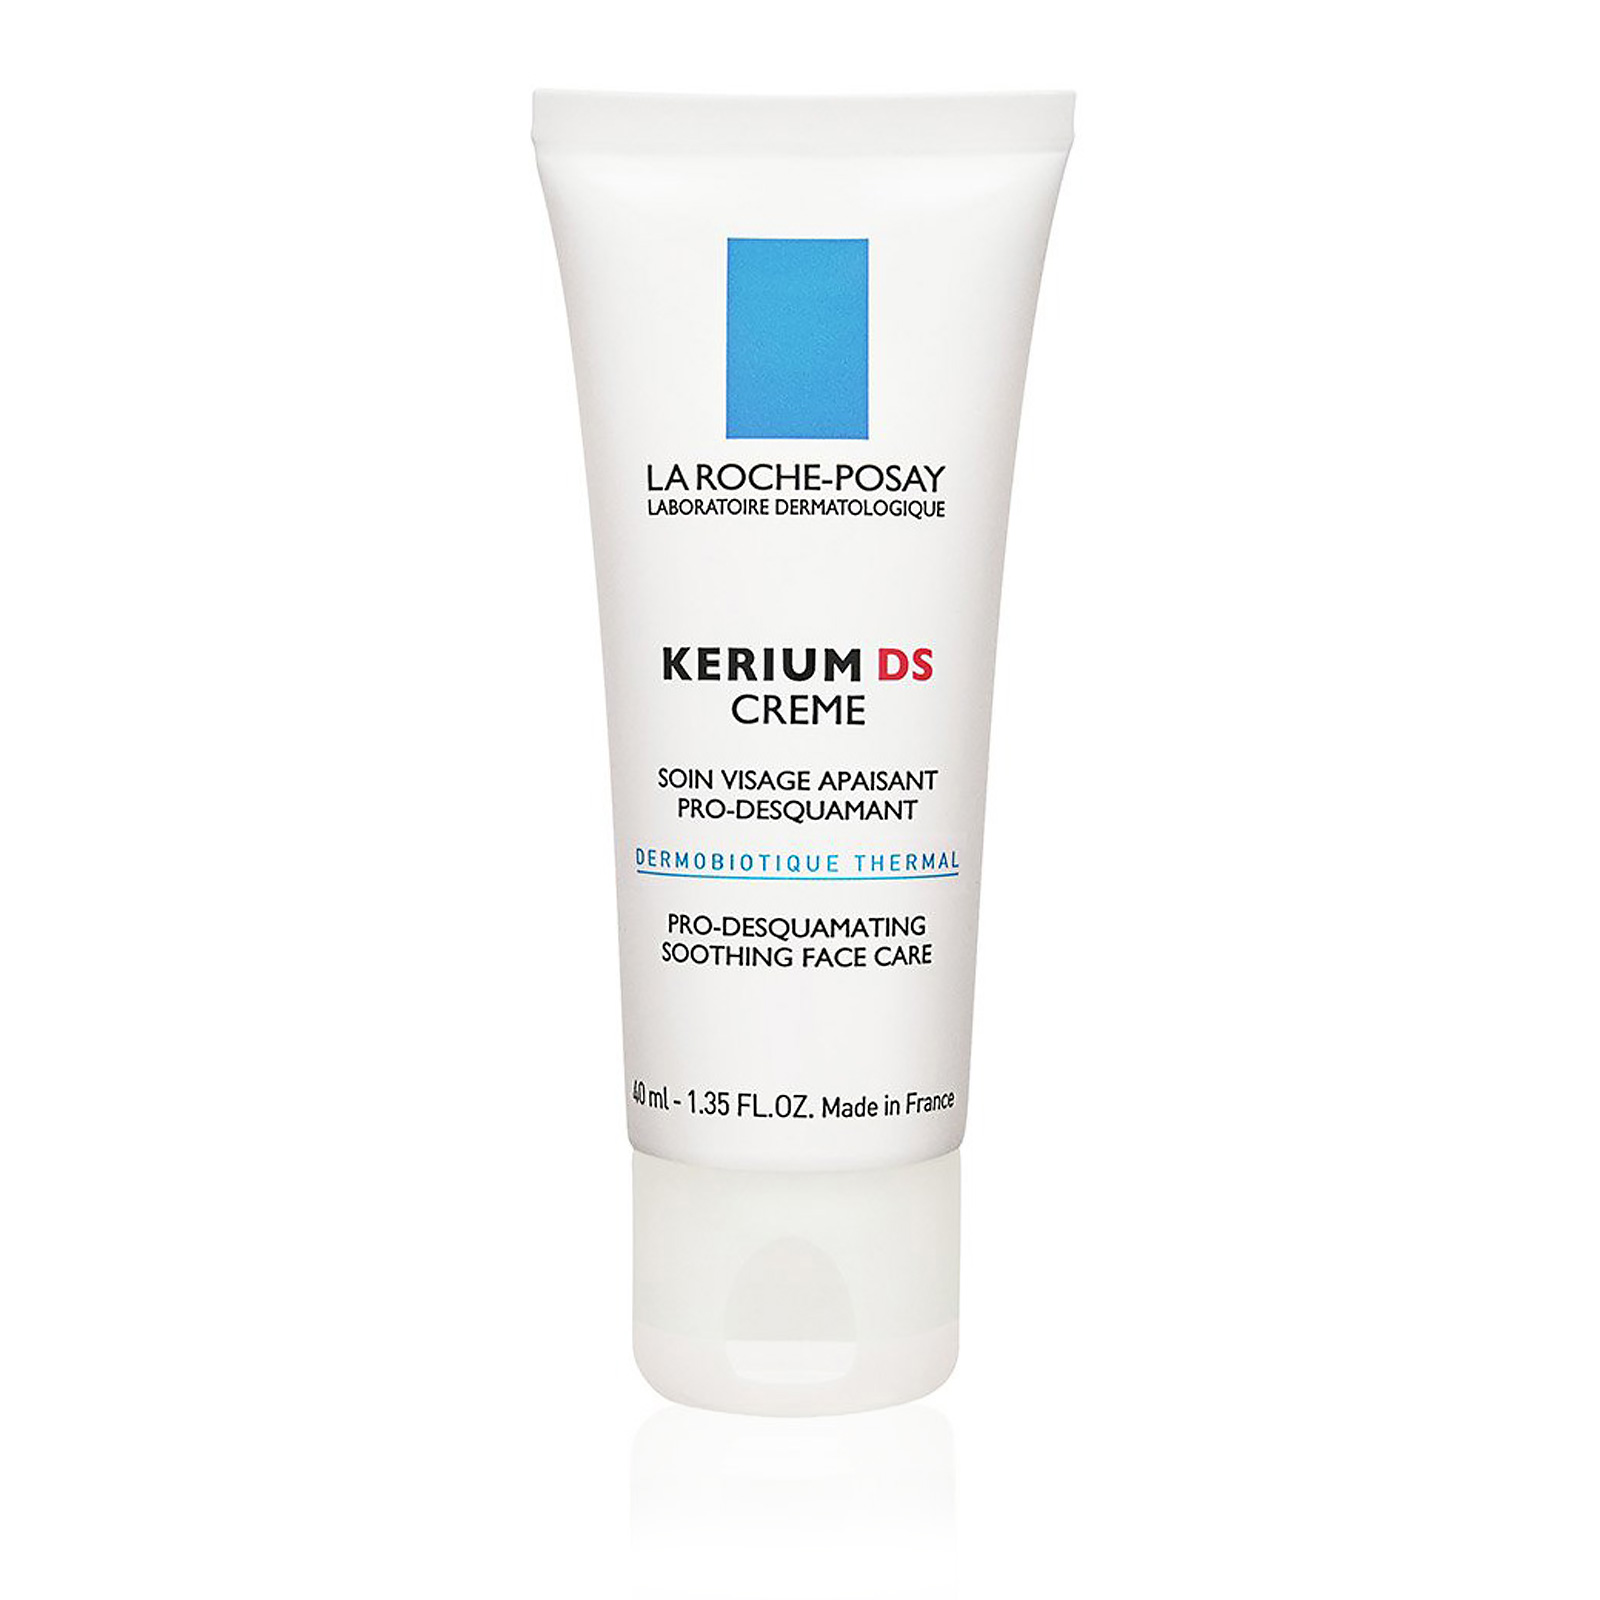 Kerium DS Pro-Desquamating Soothing Face Care